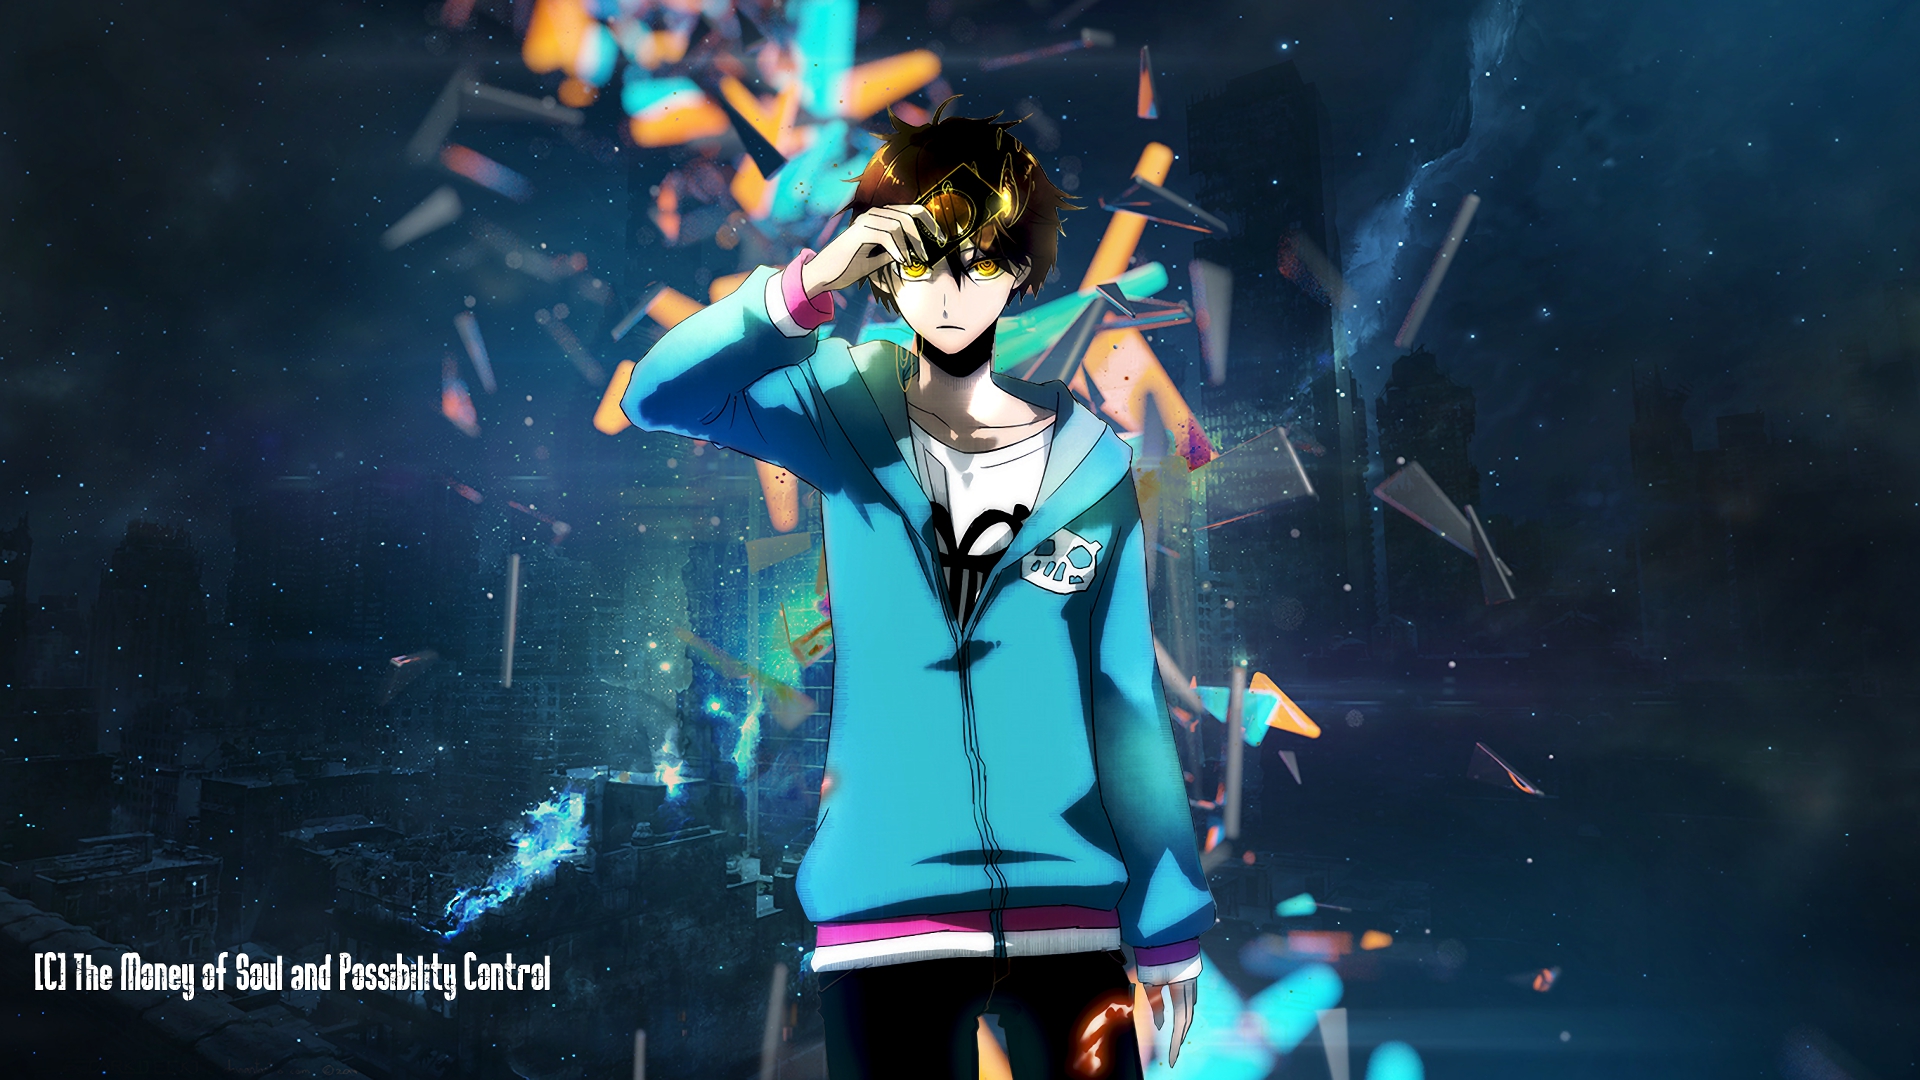 HD wallpaper C The Money of Soul and Possibility Control anime arts  culture and entertainment  Wallpaper Flare